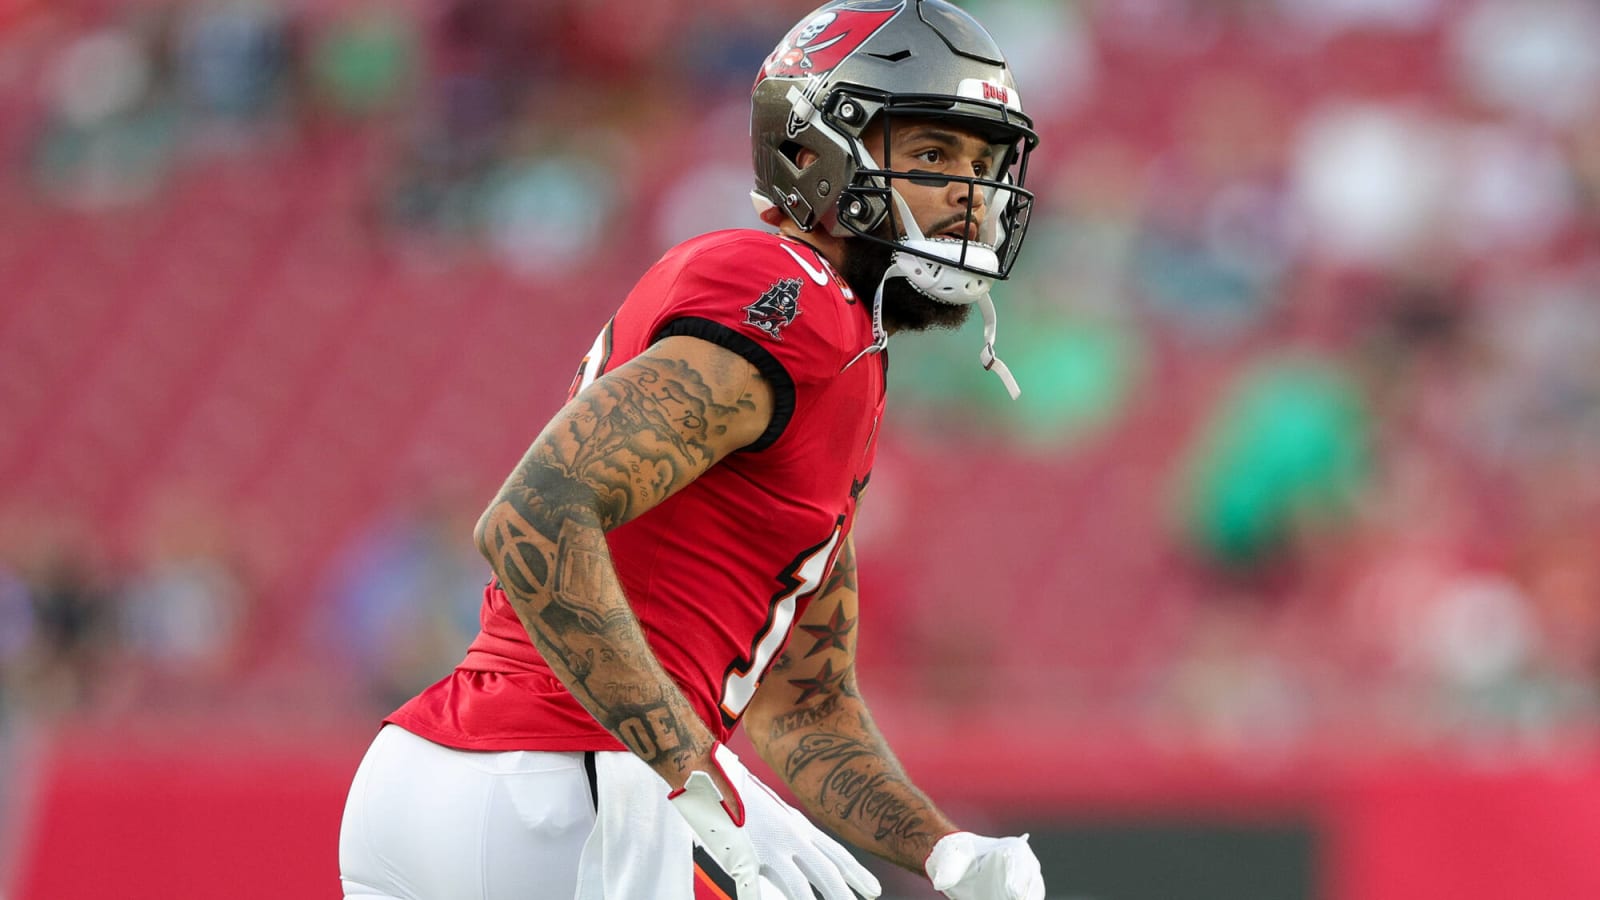 Young receivers step up with Bucs touchdowns after Mike Evans' injury